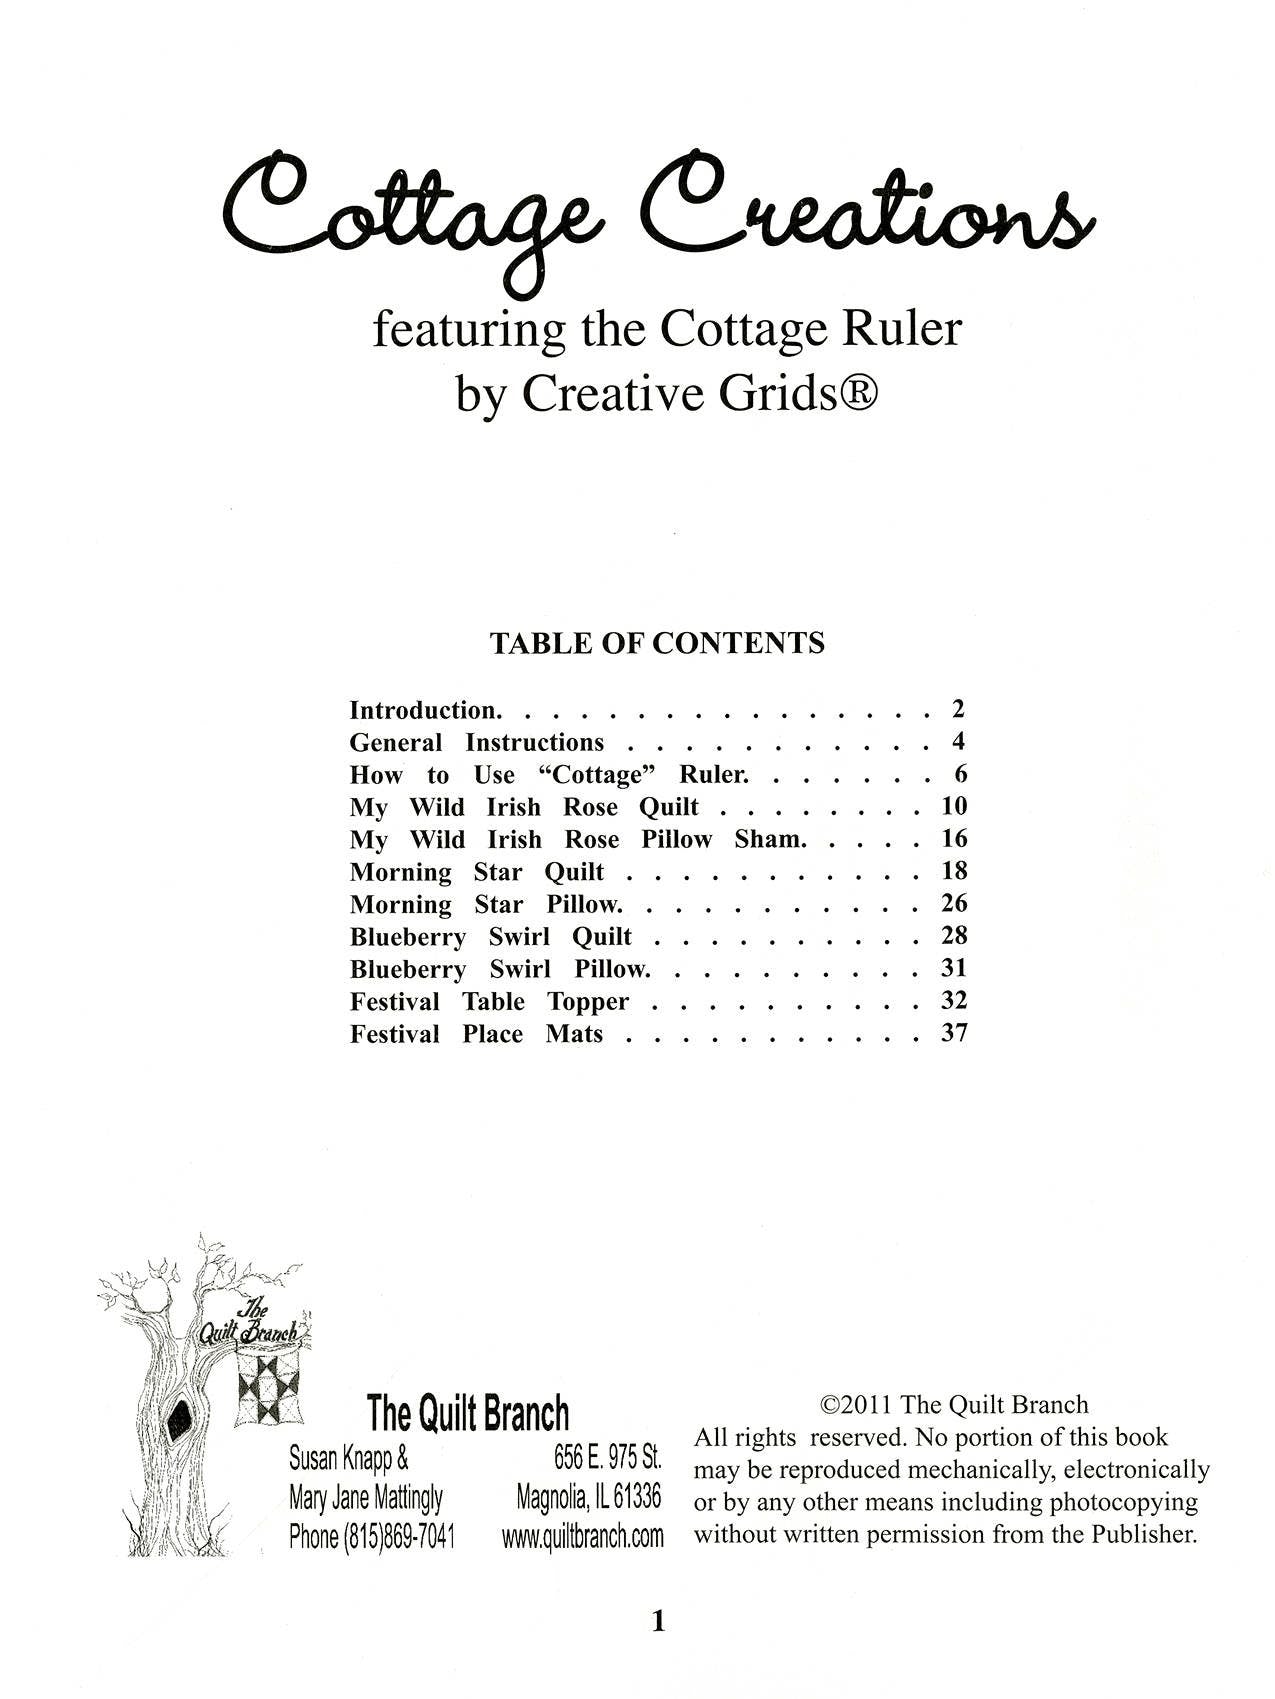 Cottage Creations Quilt Pattern Book by Susan Knapp of The Quilt Branch